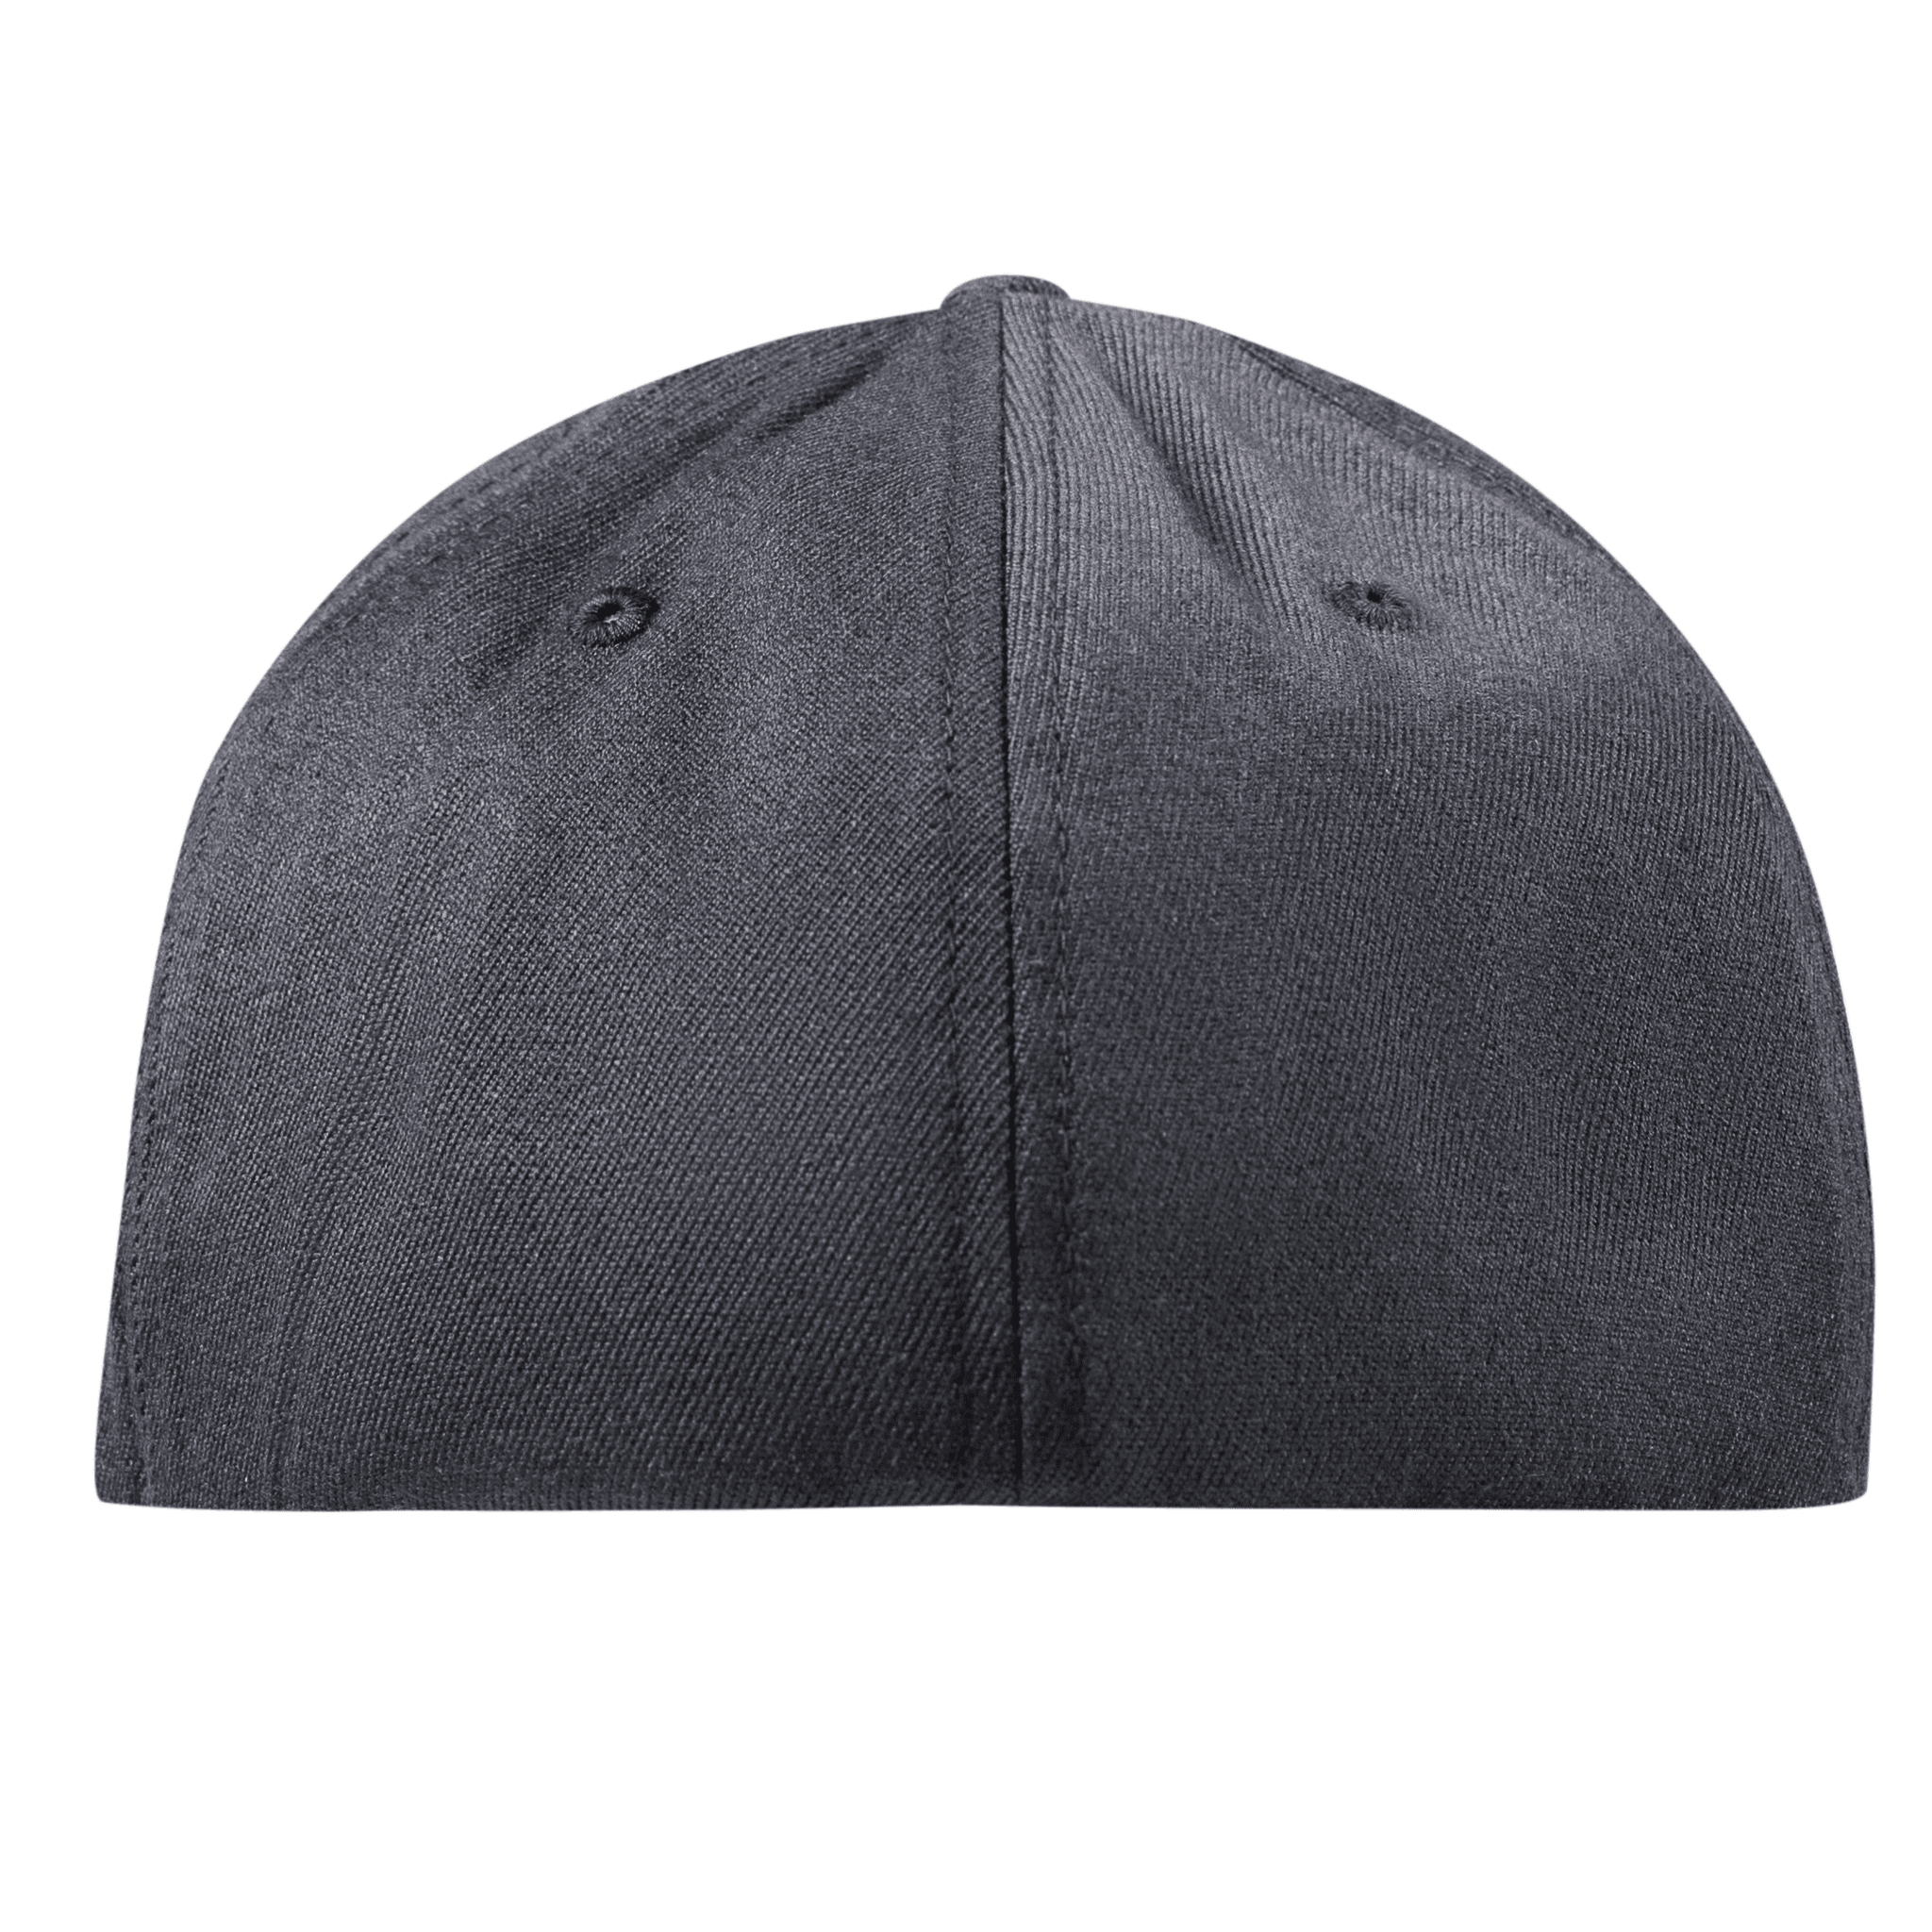 Montana 41 Flexfit Fitted Back Charcoal